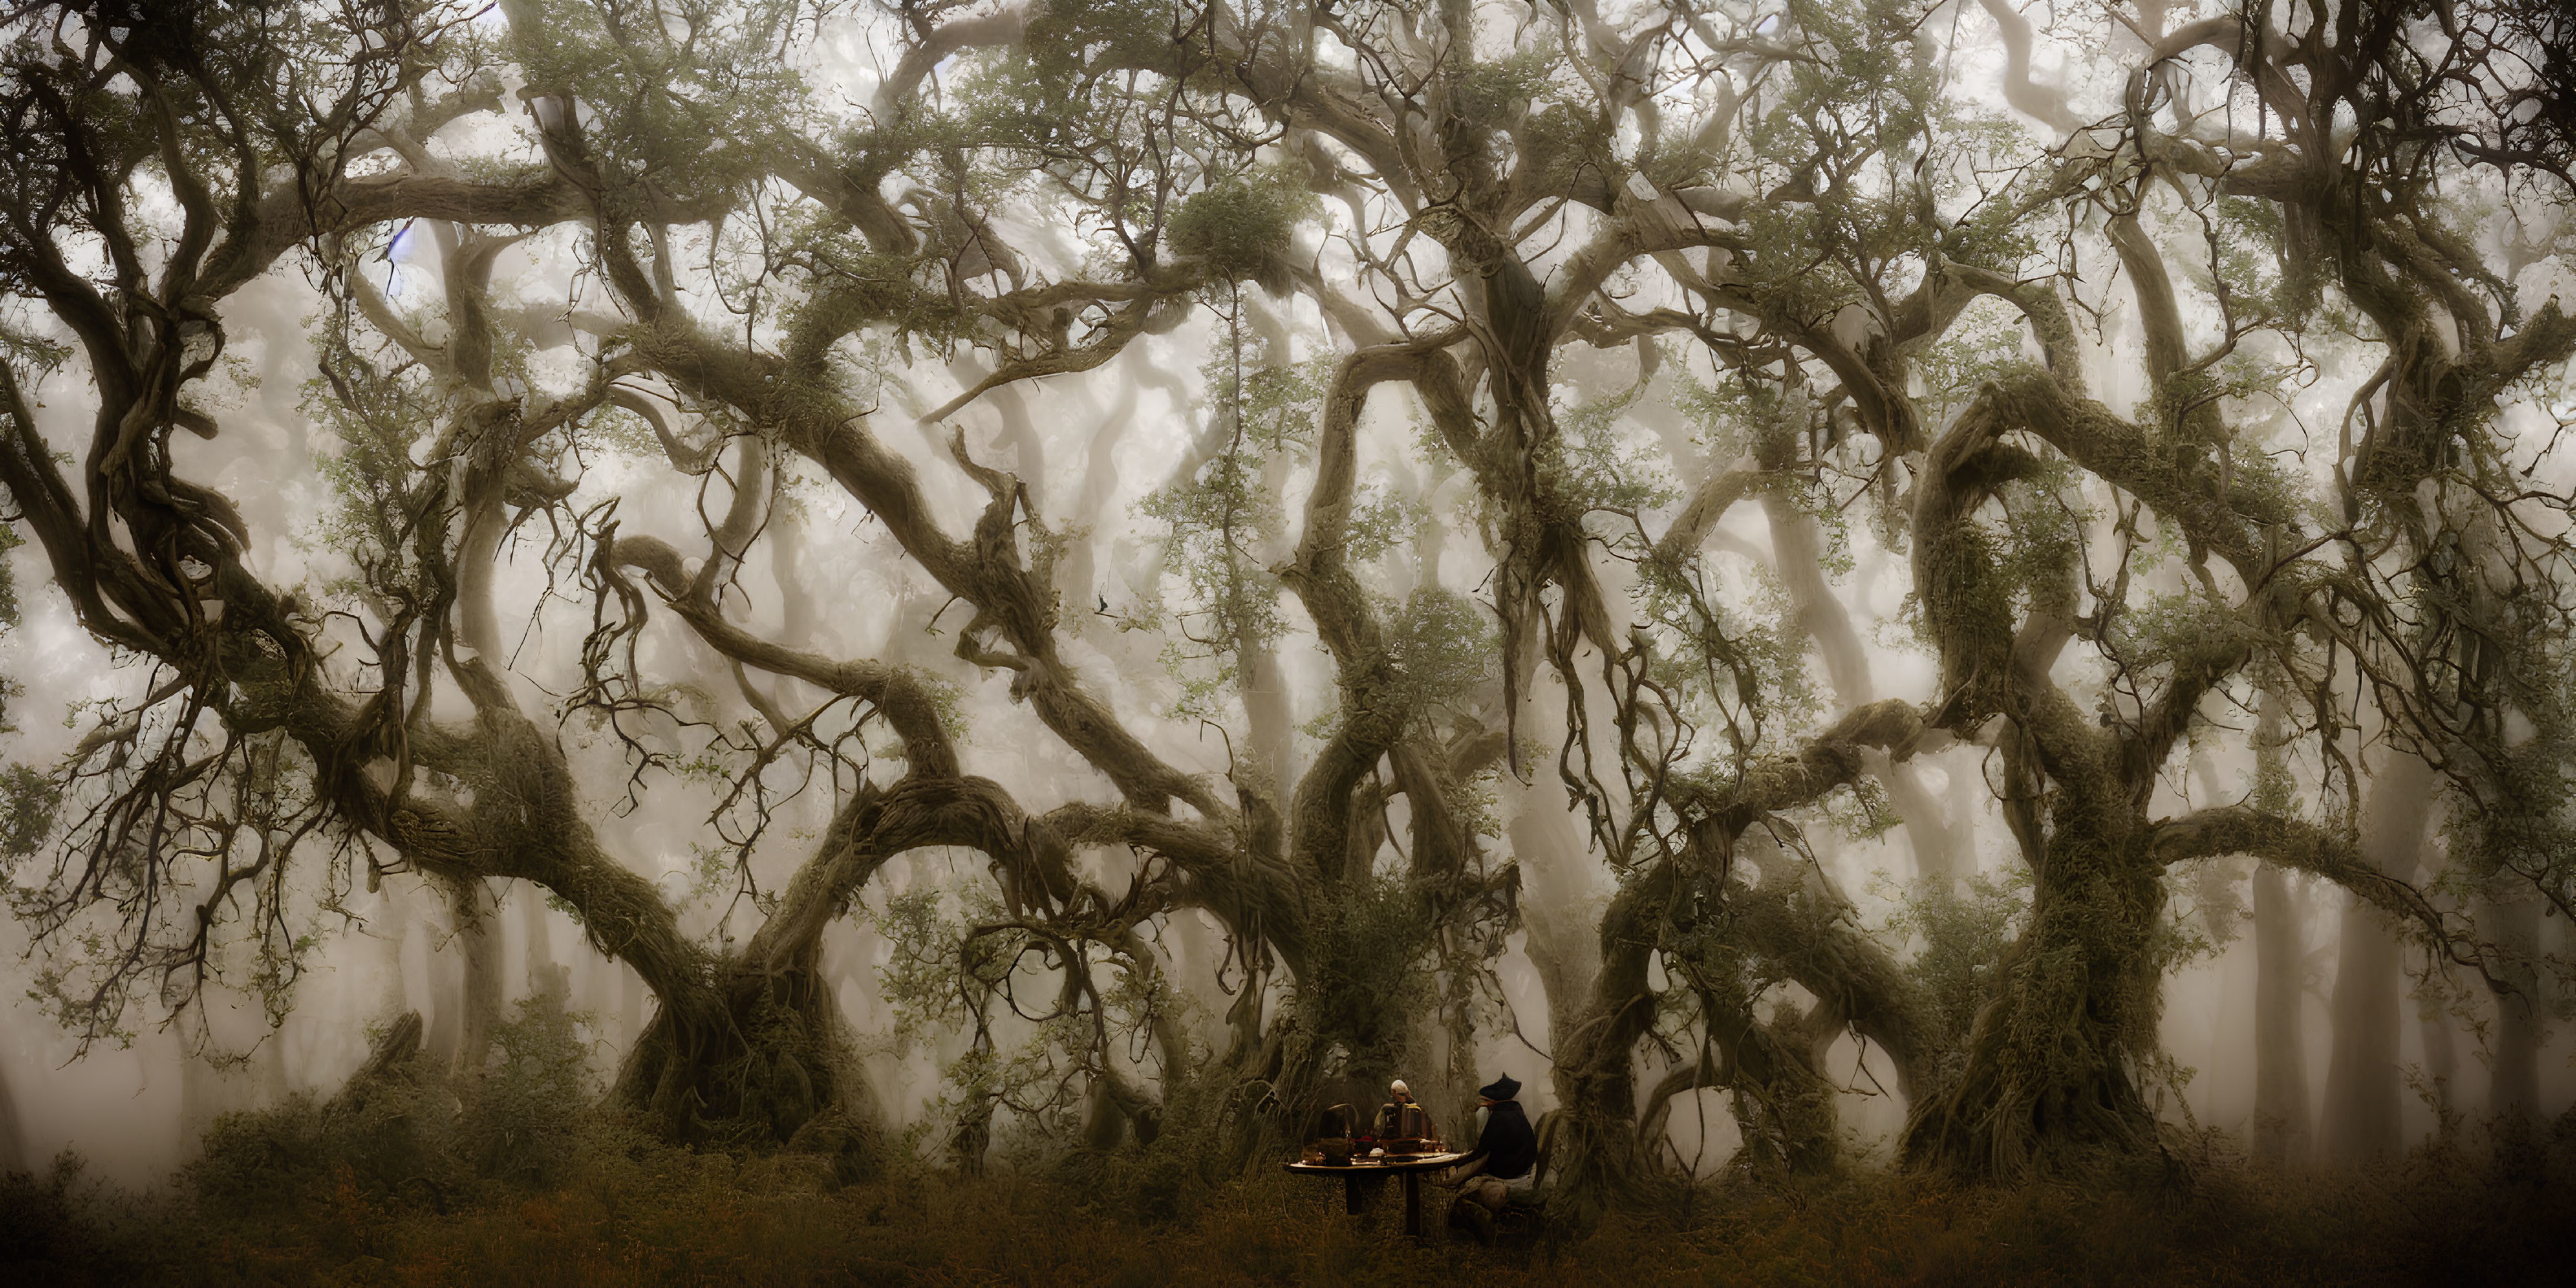 Mystical artwork: Two people at table under twisted, misty trees